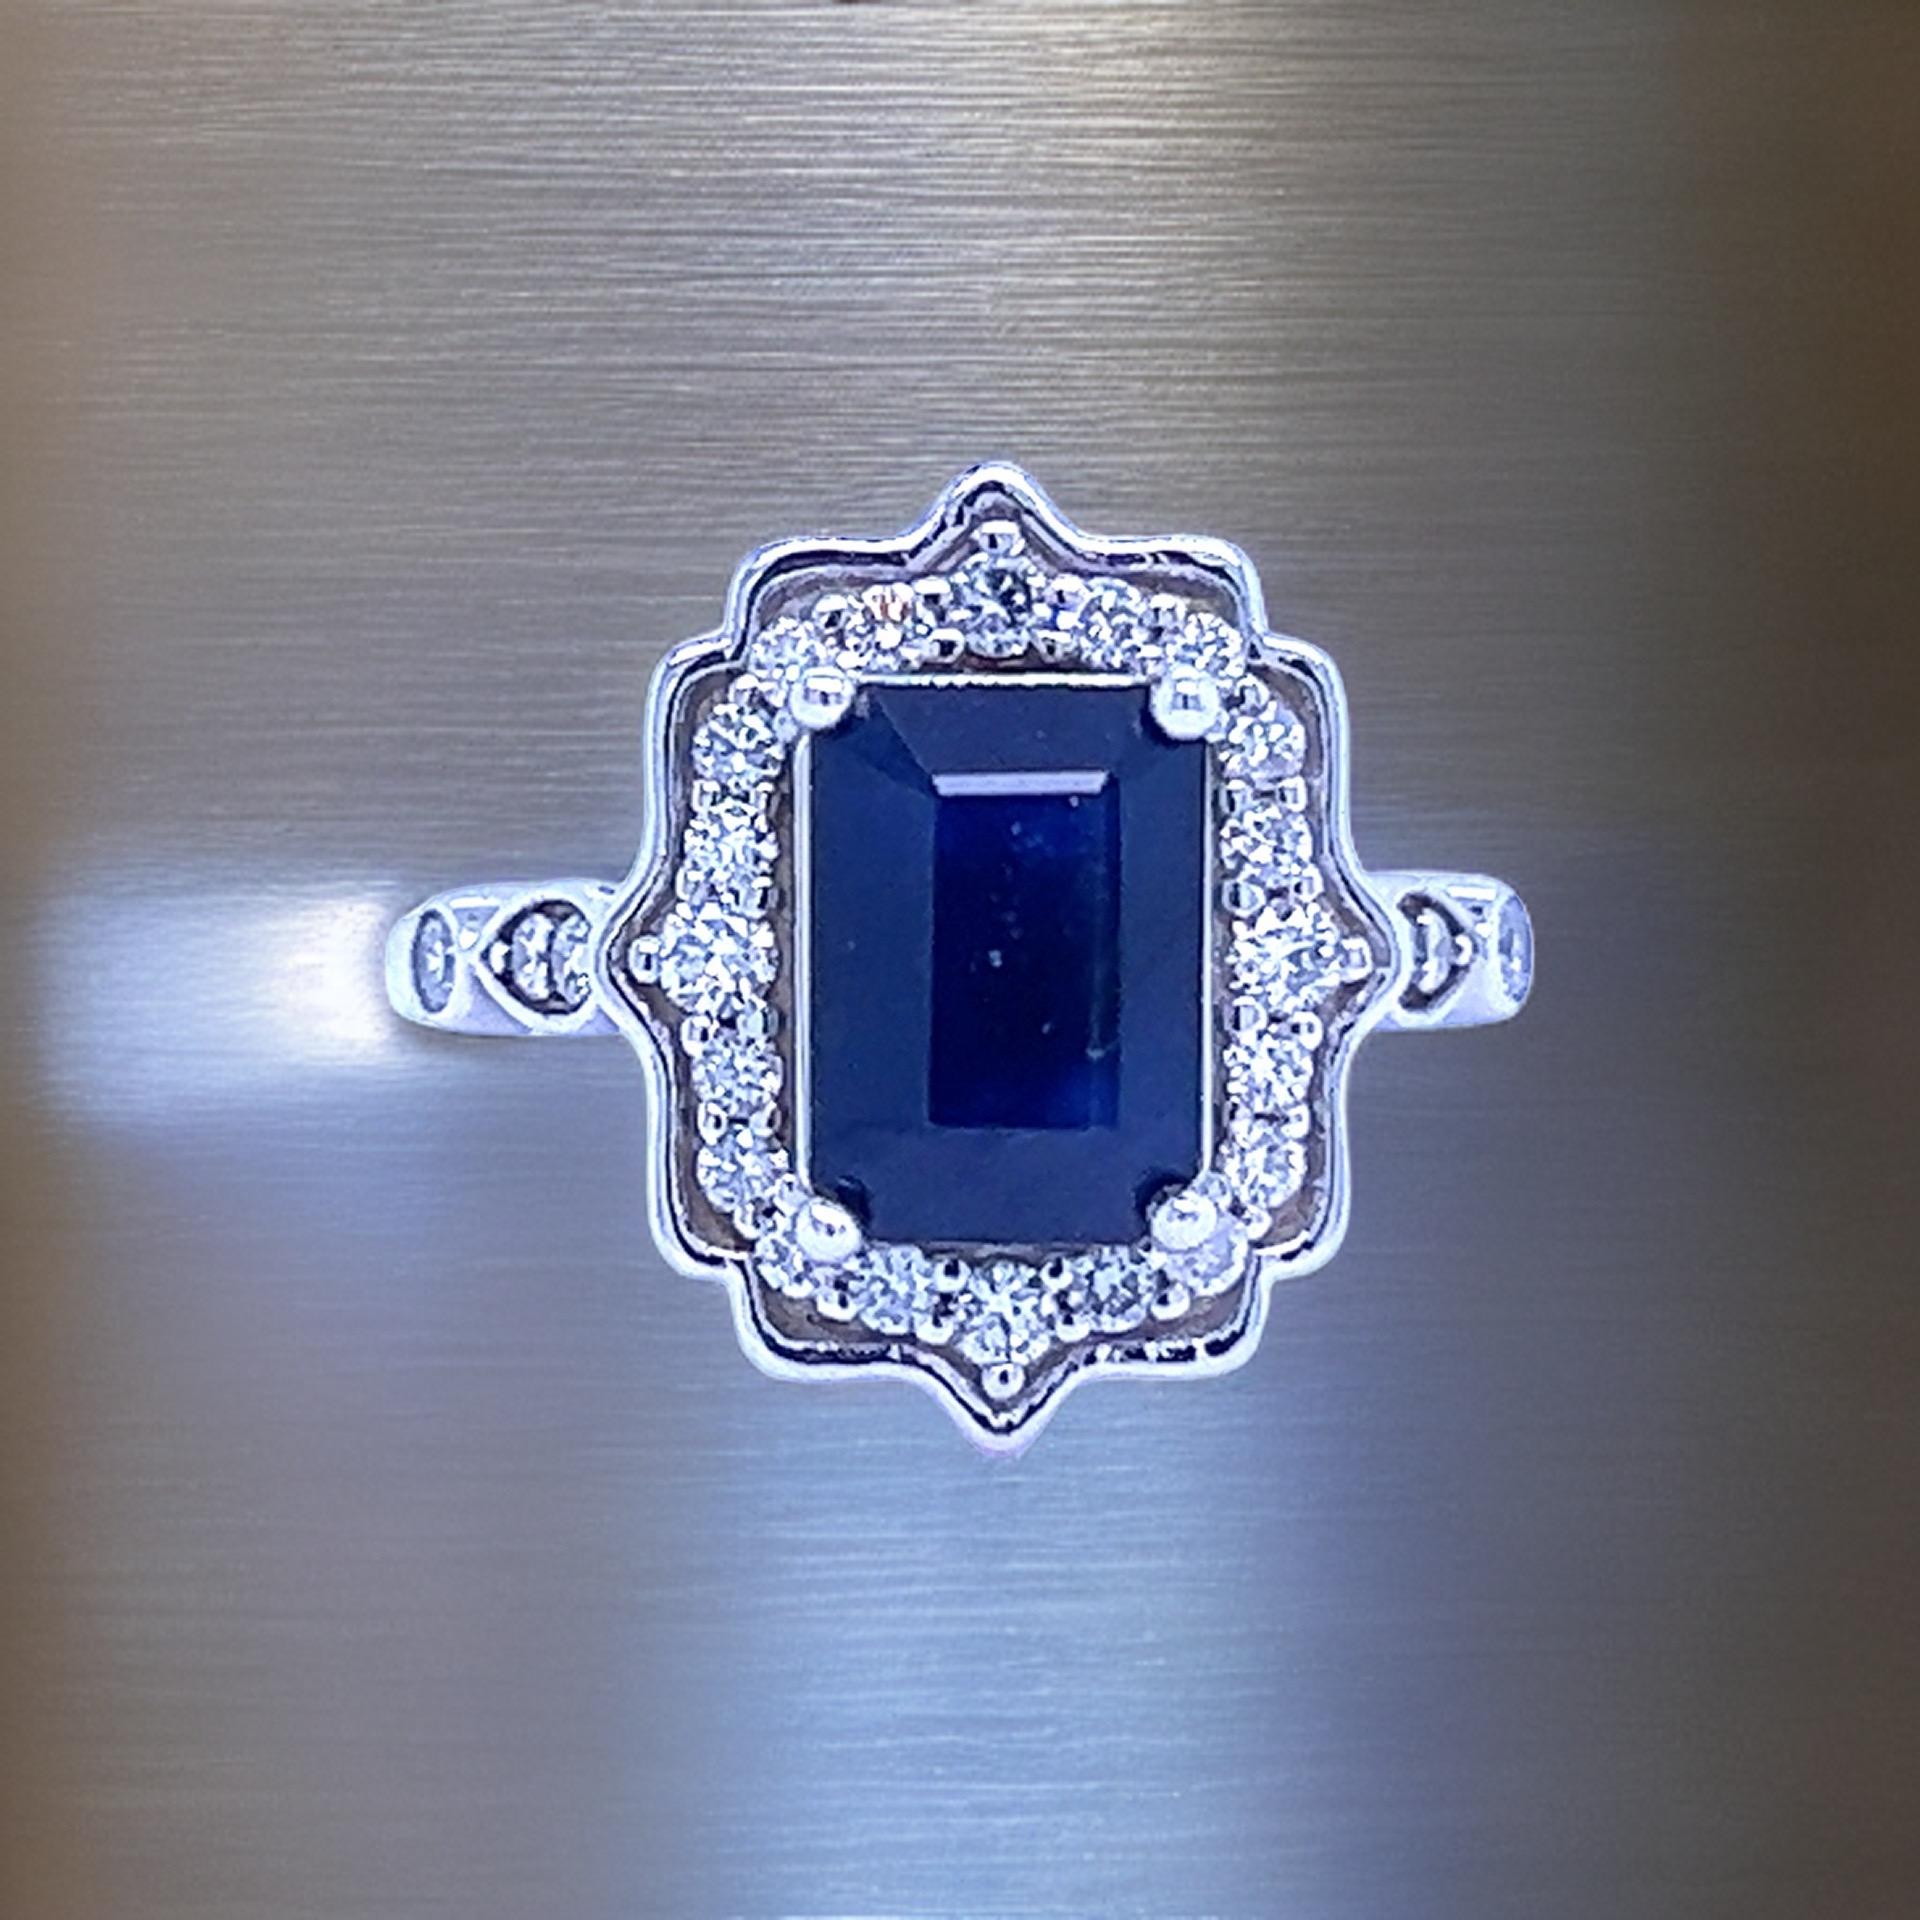 Ladies Quality Finely Faceted Composite Sapphire Diamond Ring Size 6.5 14k White Gold 3.51 TCW Certified $2,950 300214

This is a Unique Custom Made Glamorous Piece of Jewelry!
 
Nothing says, “I Love you” more than Diamonds and Pearls!
 
This